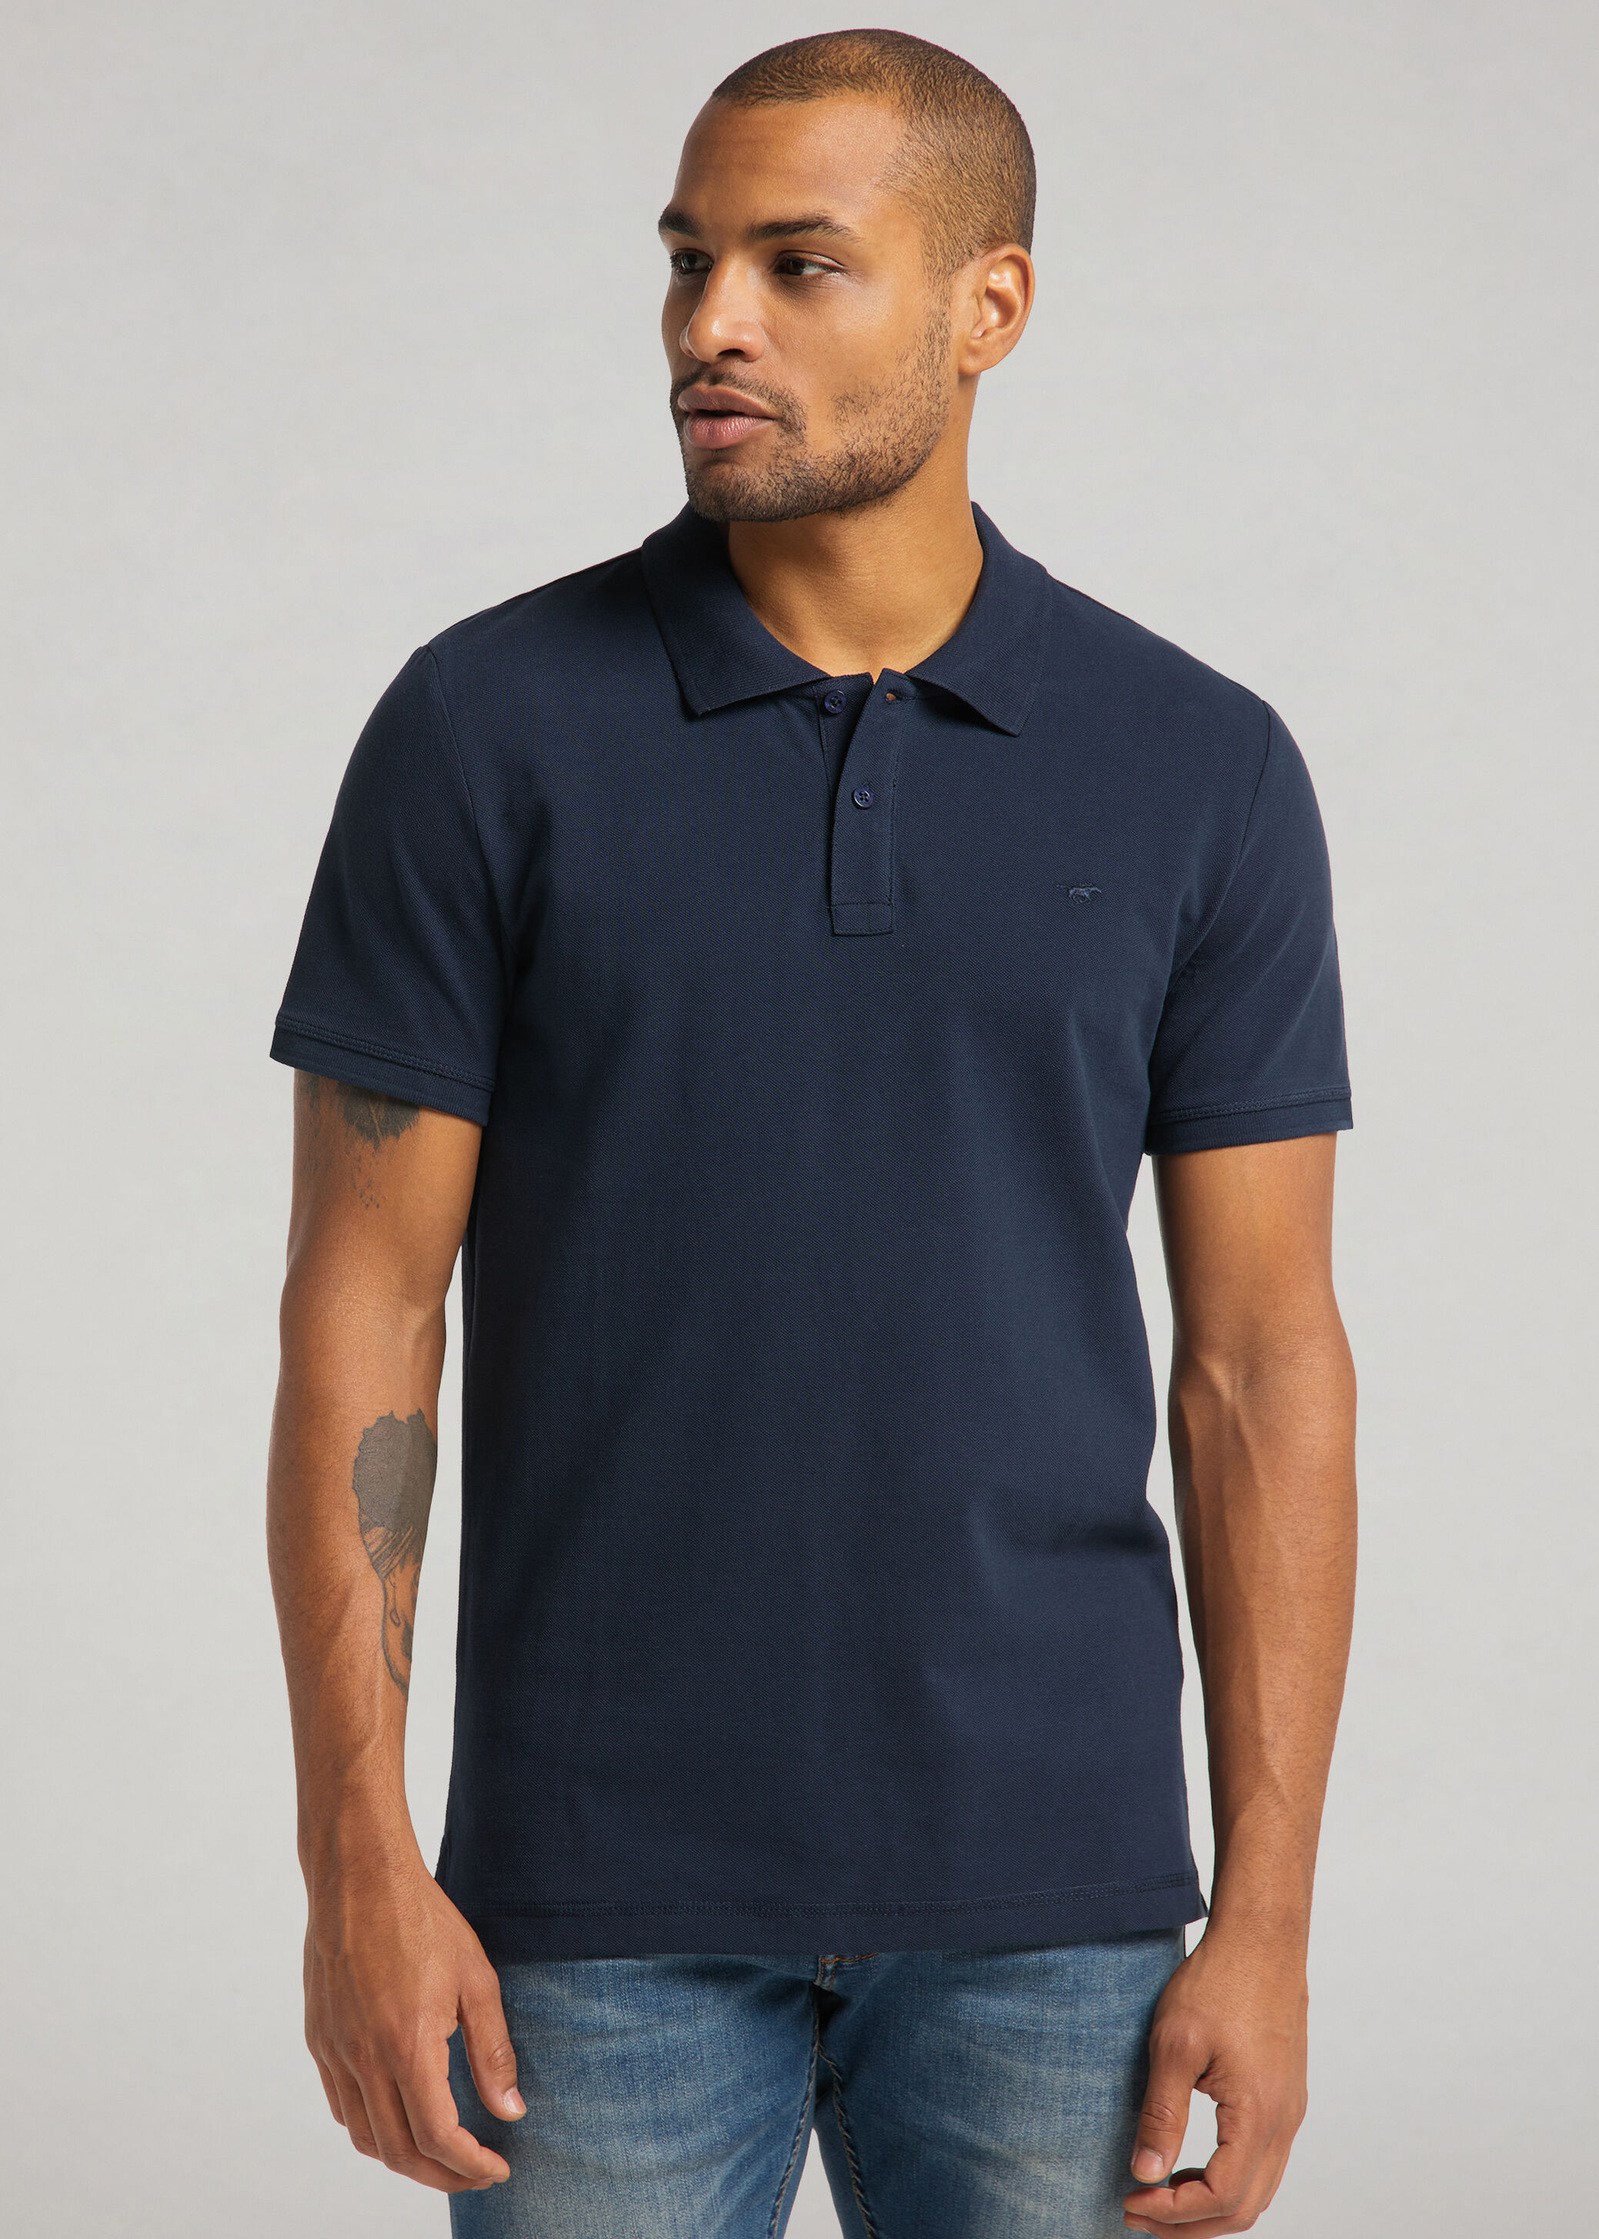 1008810-4136 Polo - Size M Mustang Sapphire Dark